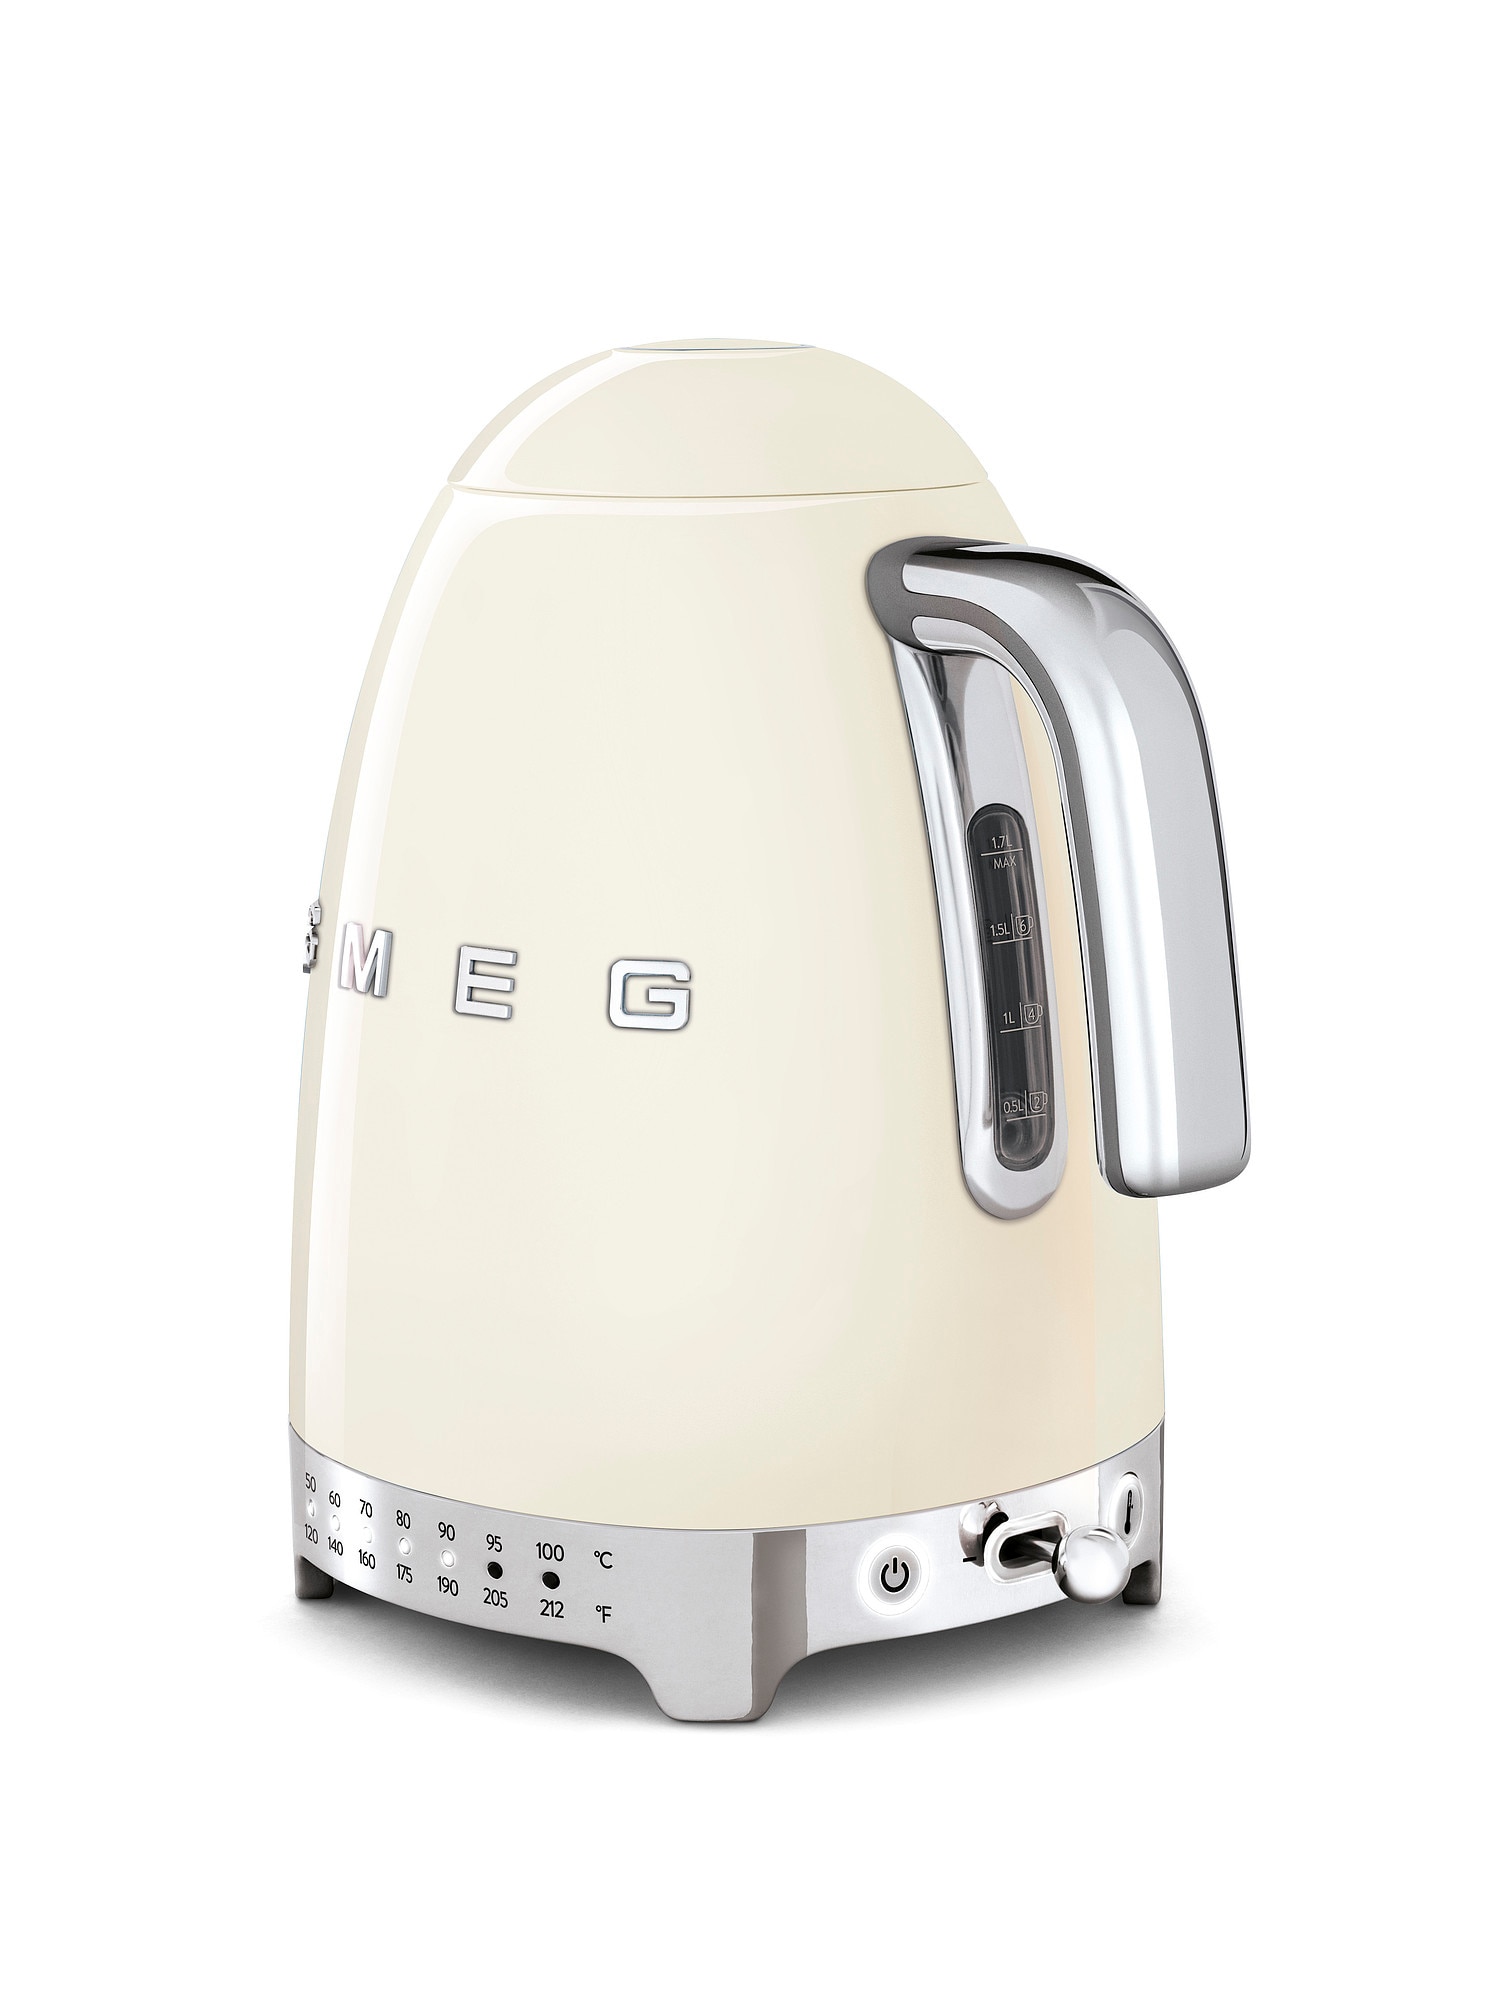 SMEG Electric Variable Temperature Kettle with 3D Logo